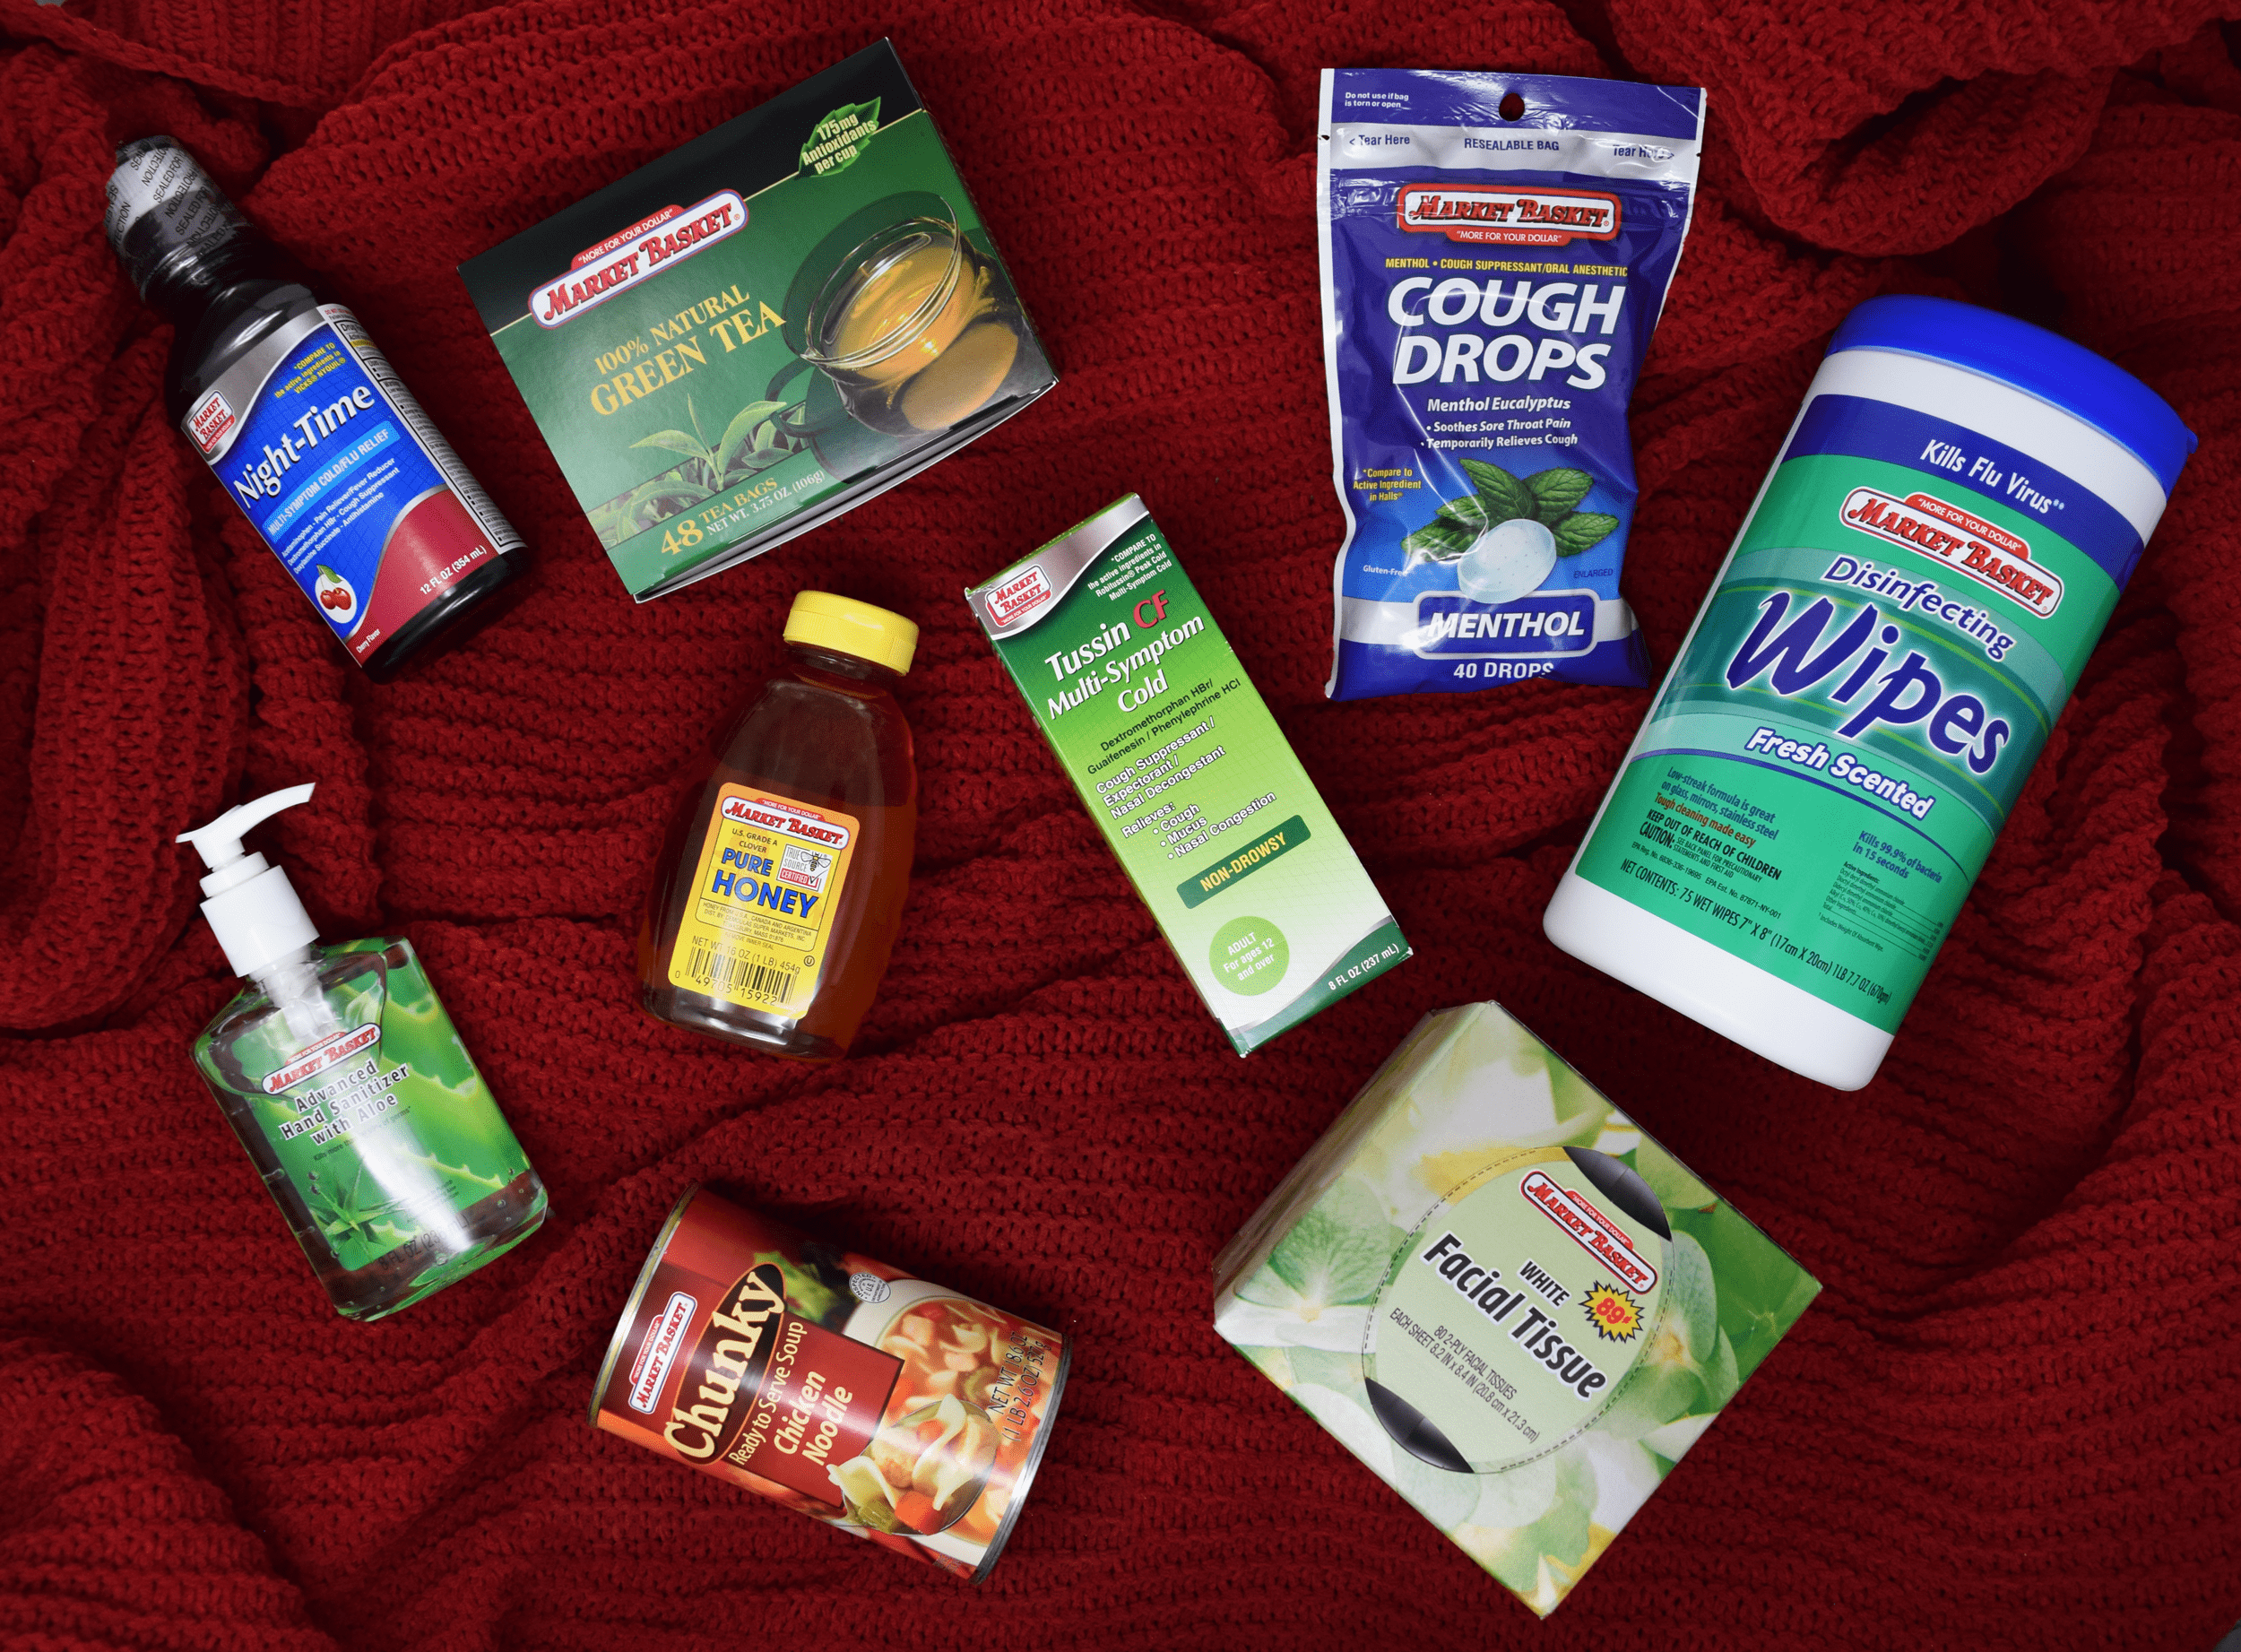 Market Basket brand cold and flu products and sick day essentials laid out on a red blanket